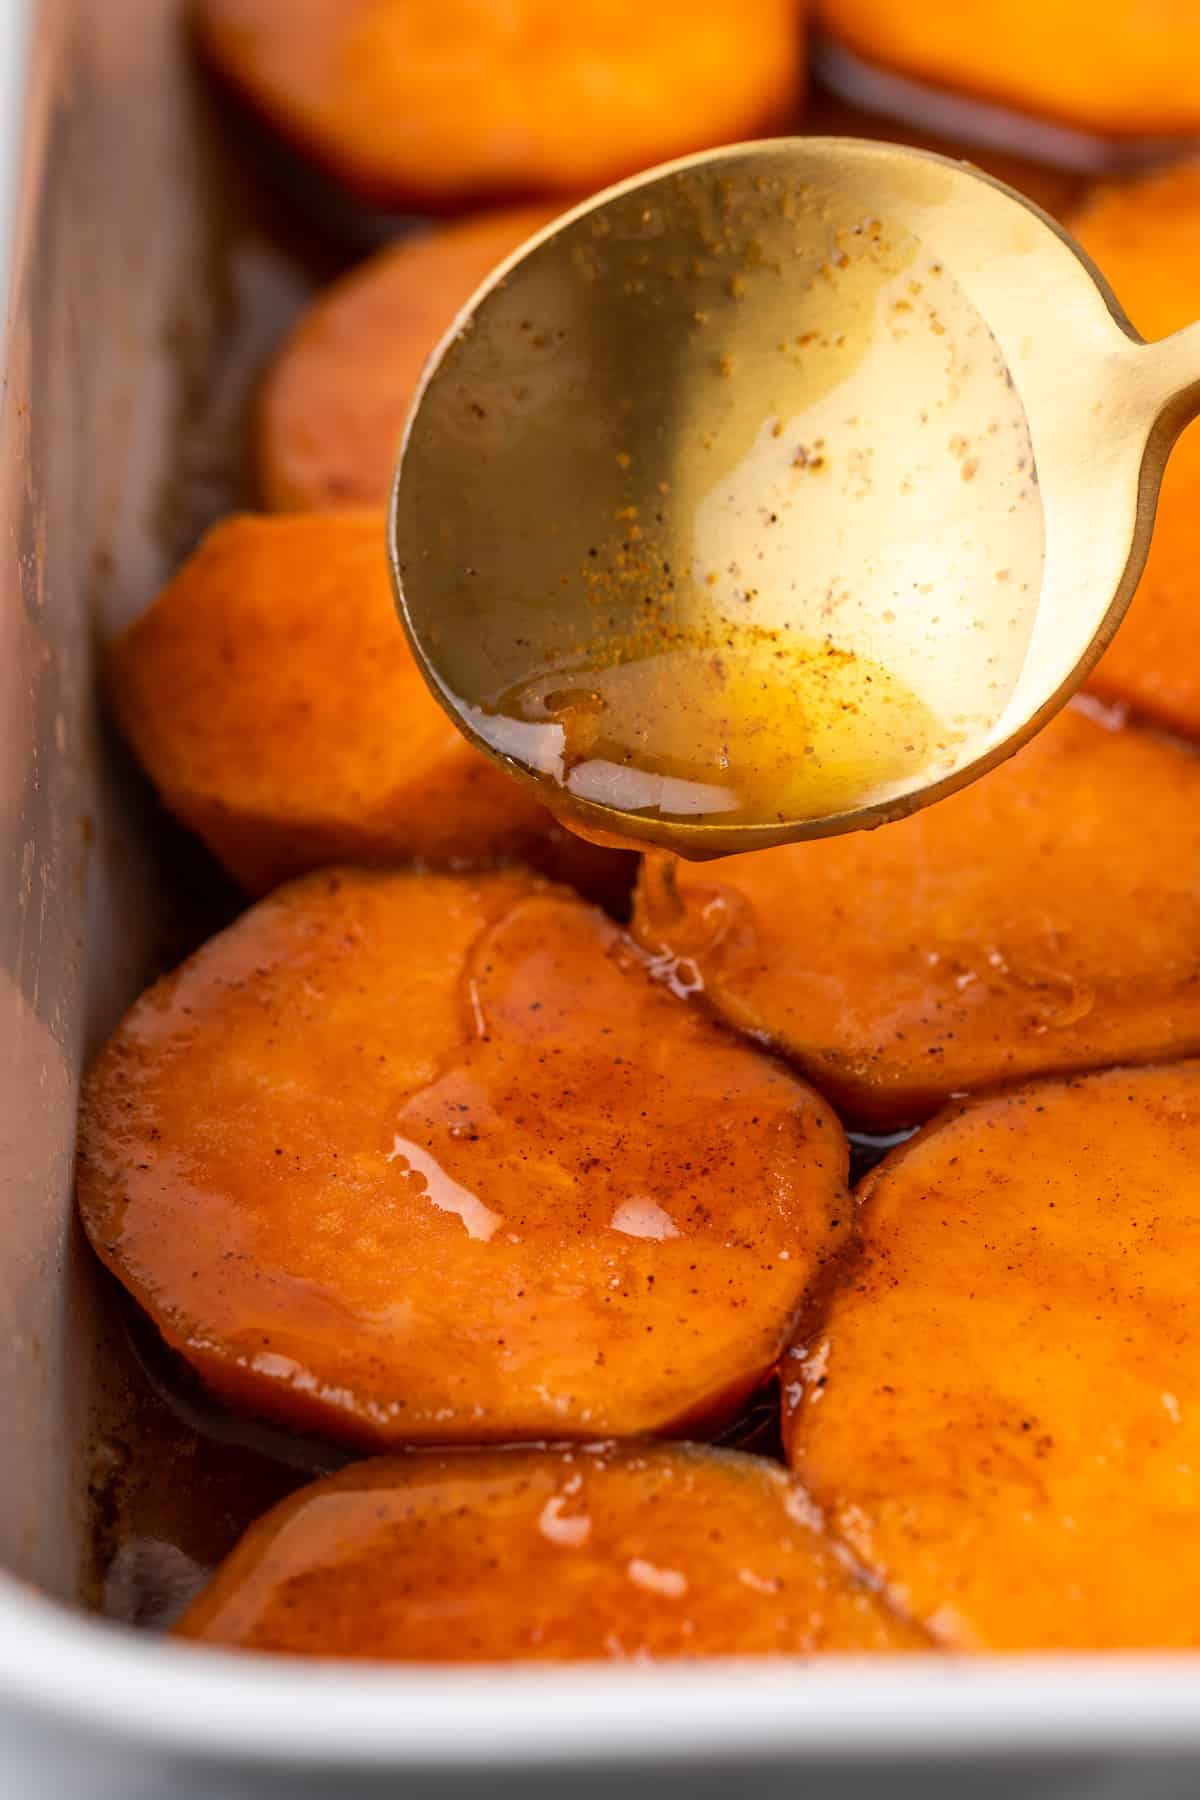 Spooning sauce on candied yams